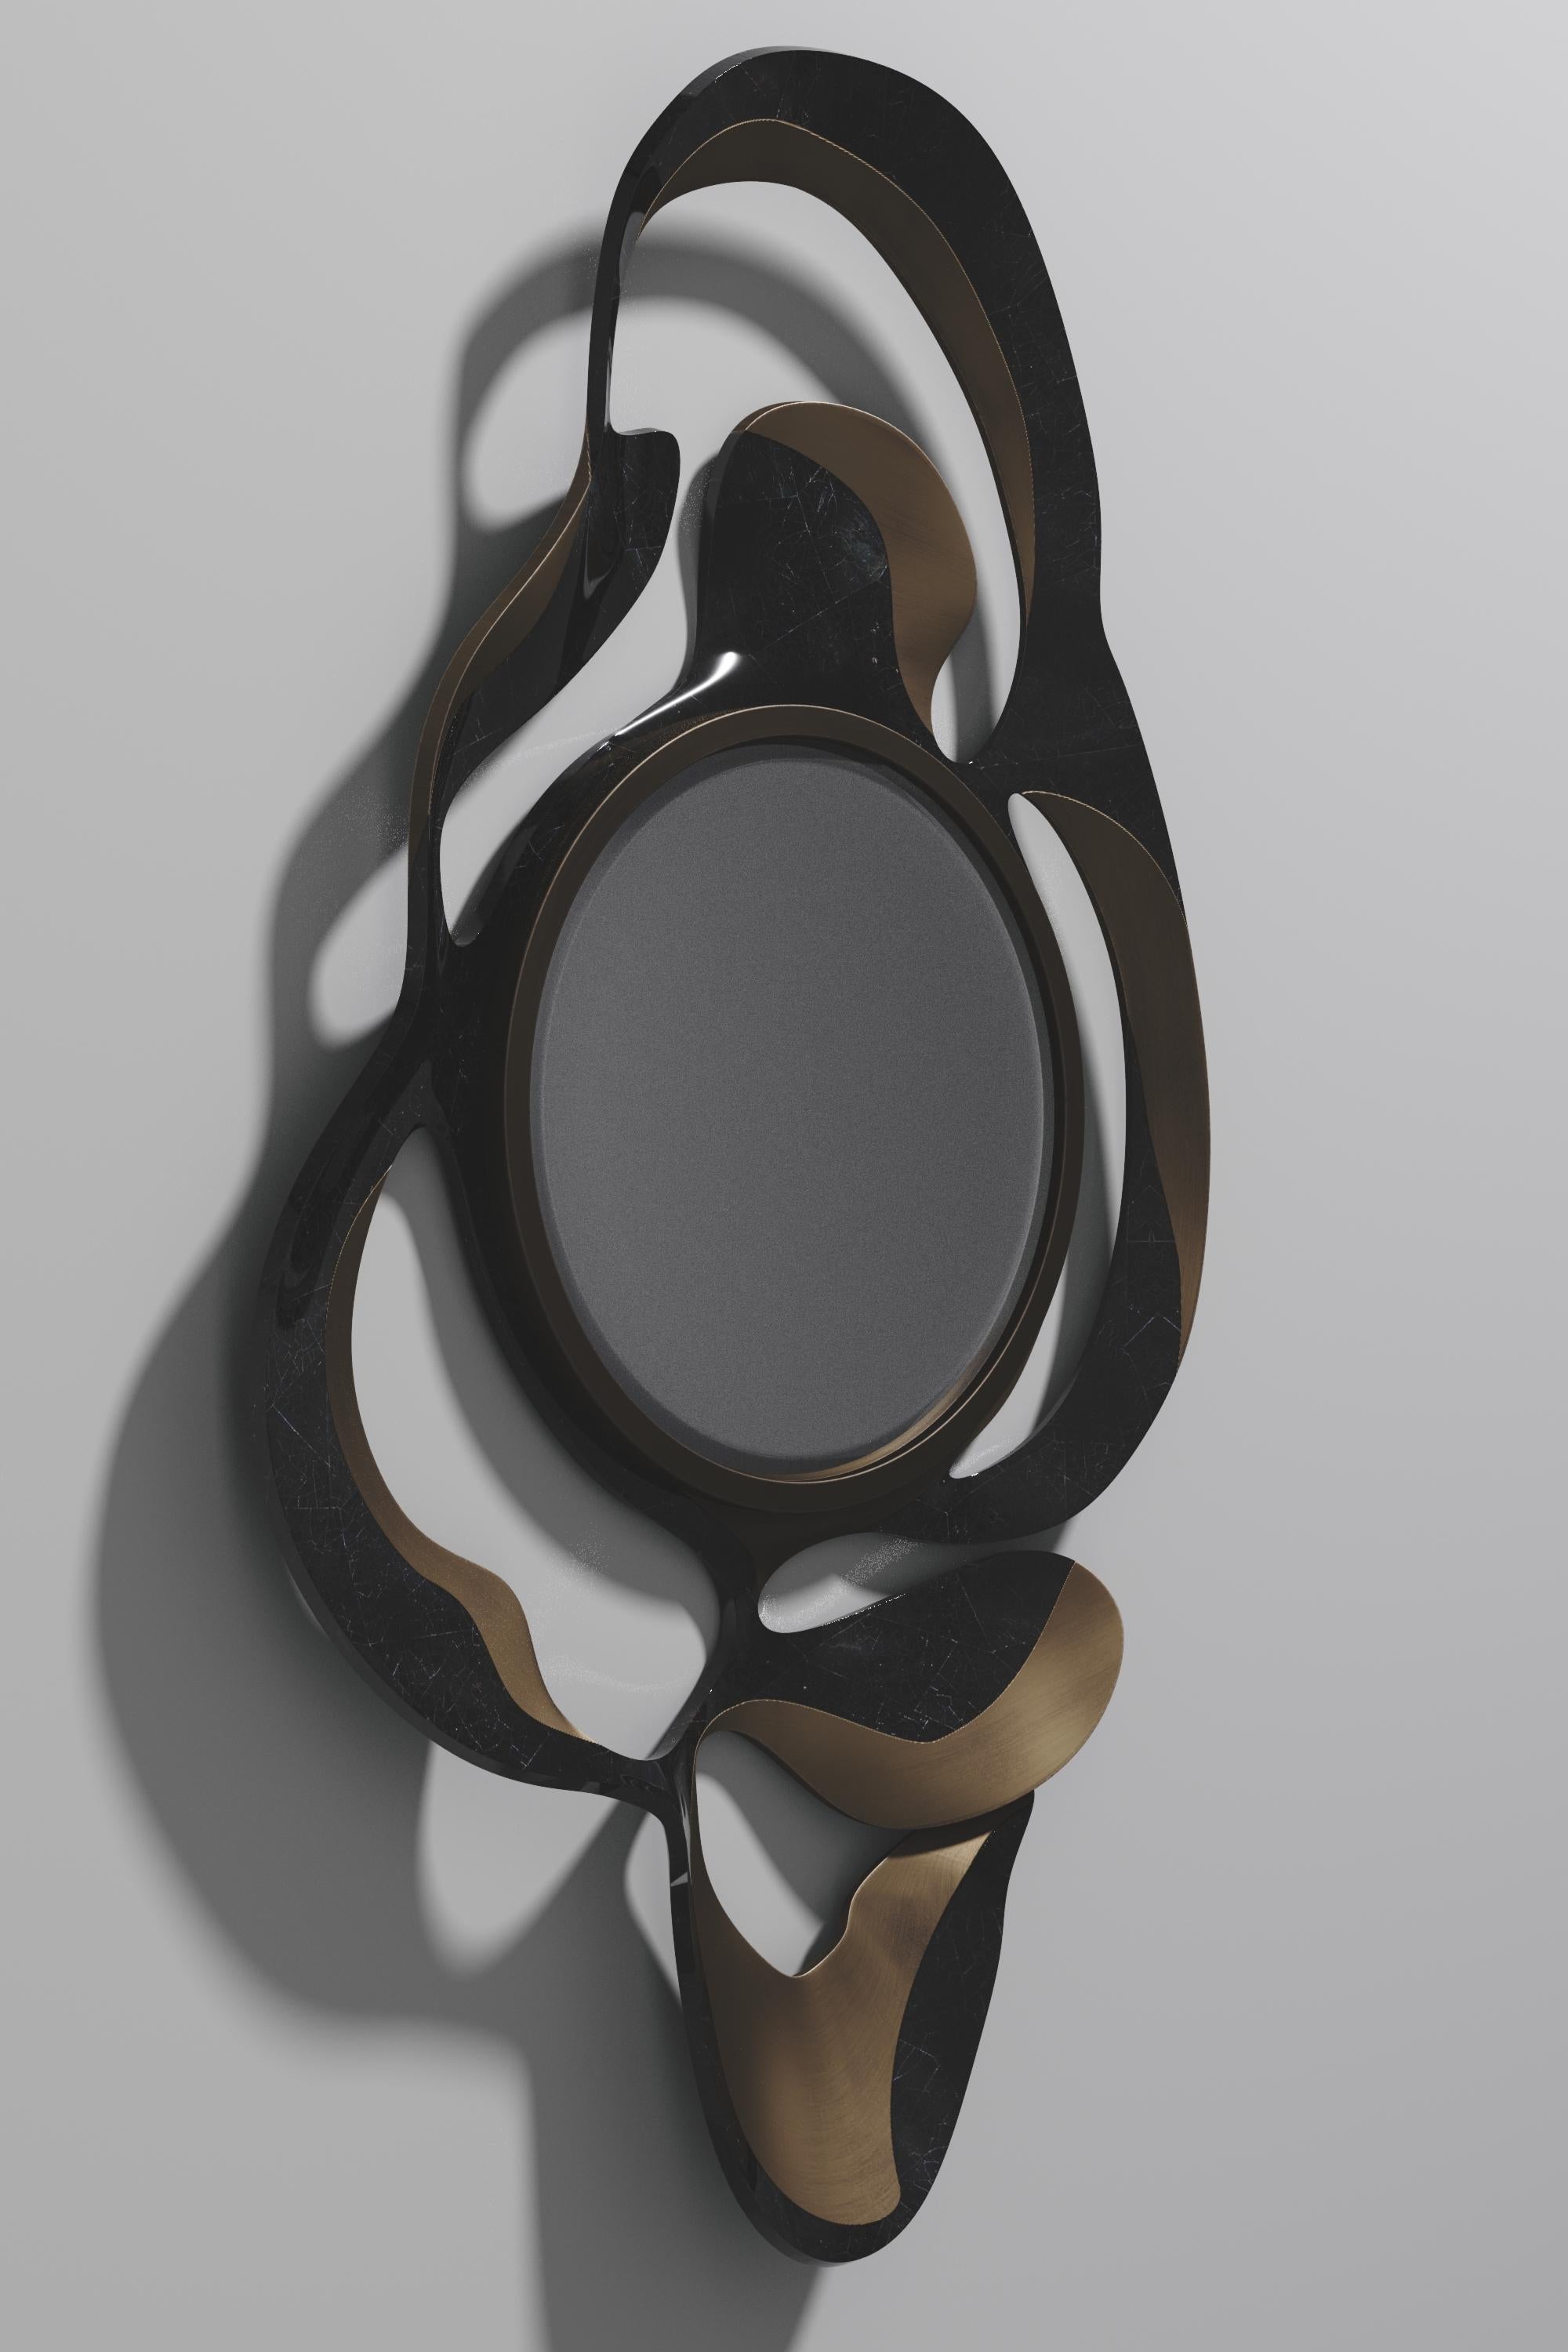 The Leaf Mirror by Kifu Paris is a dramatic and organic piece. The black pen shell and bronze-patina bass inlay mixture creates a striking appearance as it emulates a whimsical interpretation of intertwining branches. This piece is designed by Kifu